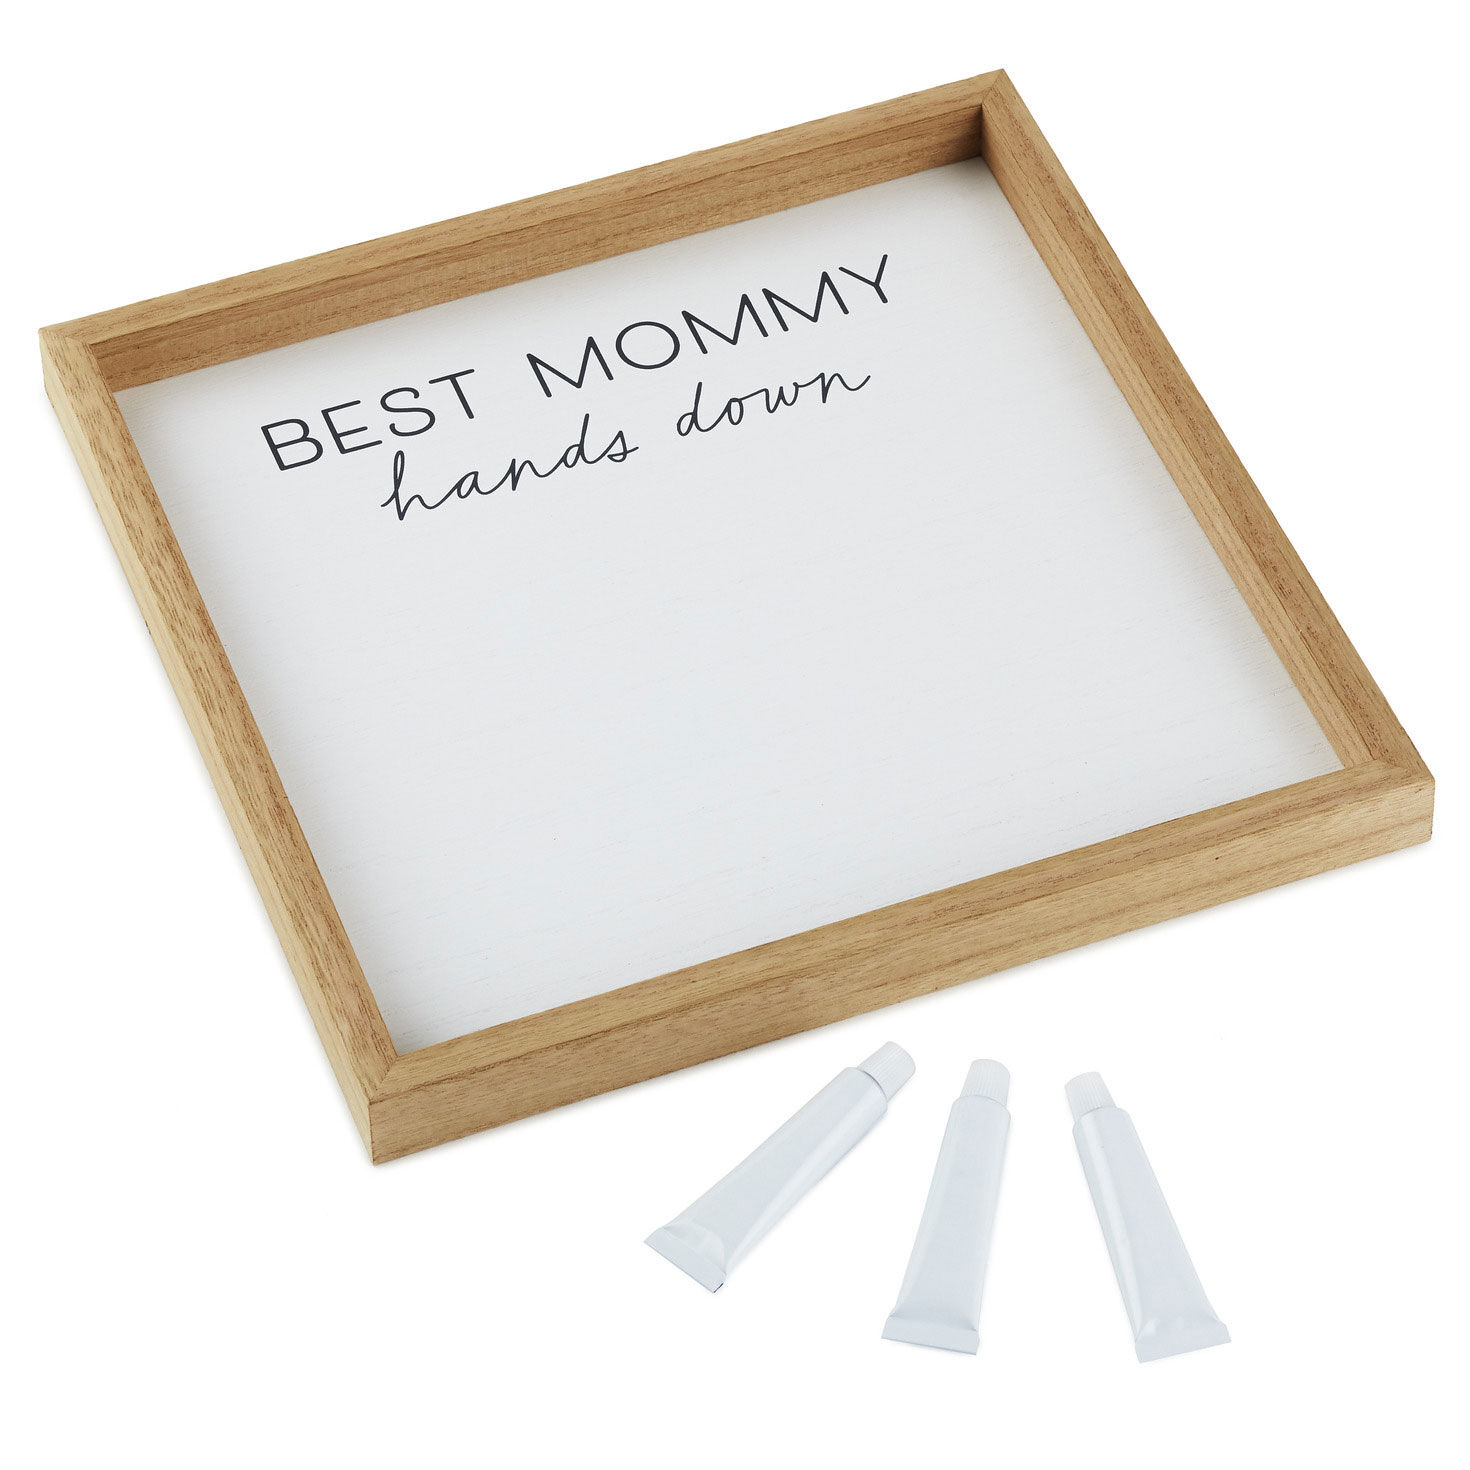 https://www.hallmark.com/dw/image/v2/AALB_PRD/on/demandware.static/-/Sites-hallmark-master/default/dw1bf09d2d/images/finished-goods/products/1BBY4849/Best-Mommy-Wood-Sign-Handprint-Kit-With-Paints_1BBY4849_01.jpg?sfrm=jpg